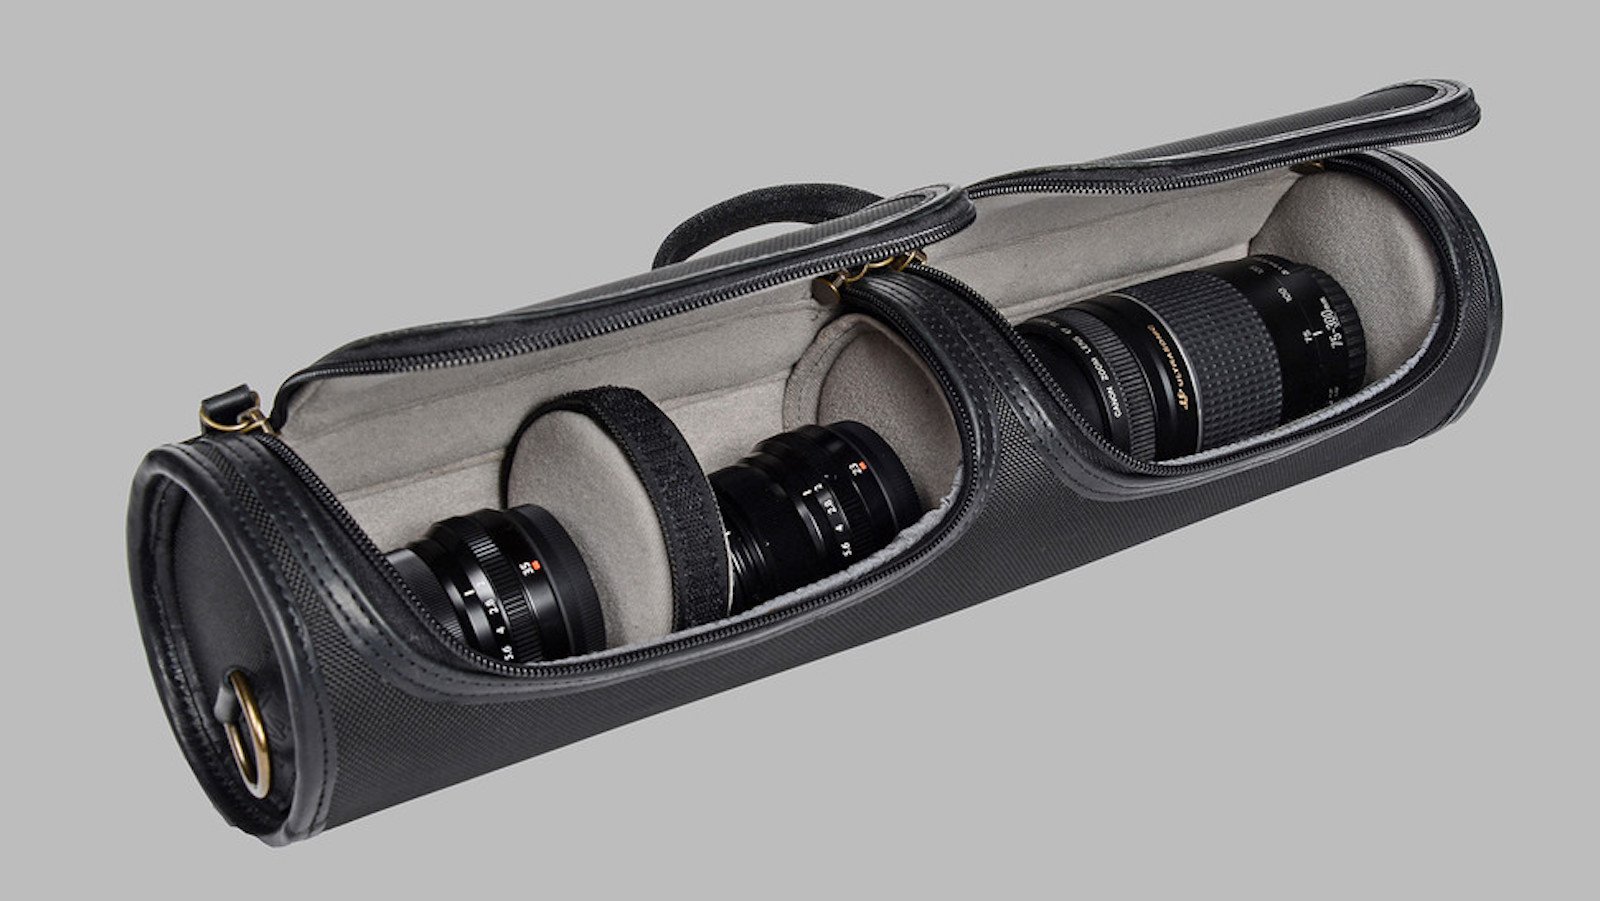 ONA Brings Back the Classic Barrel-Style Lens Bag with the New Beacon